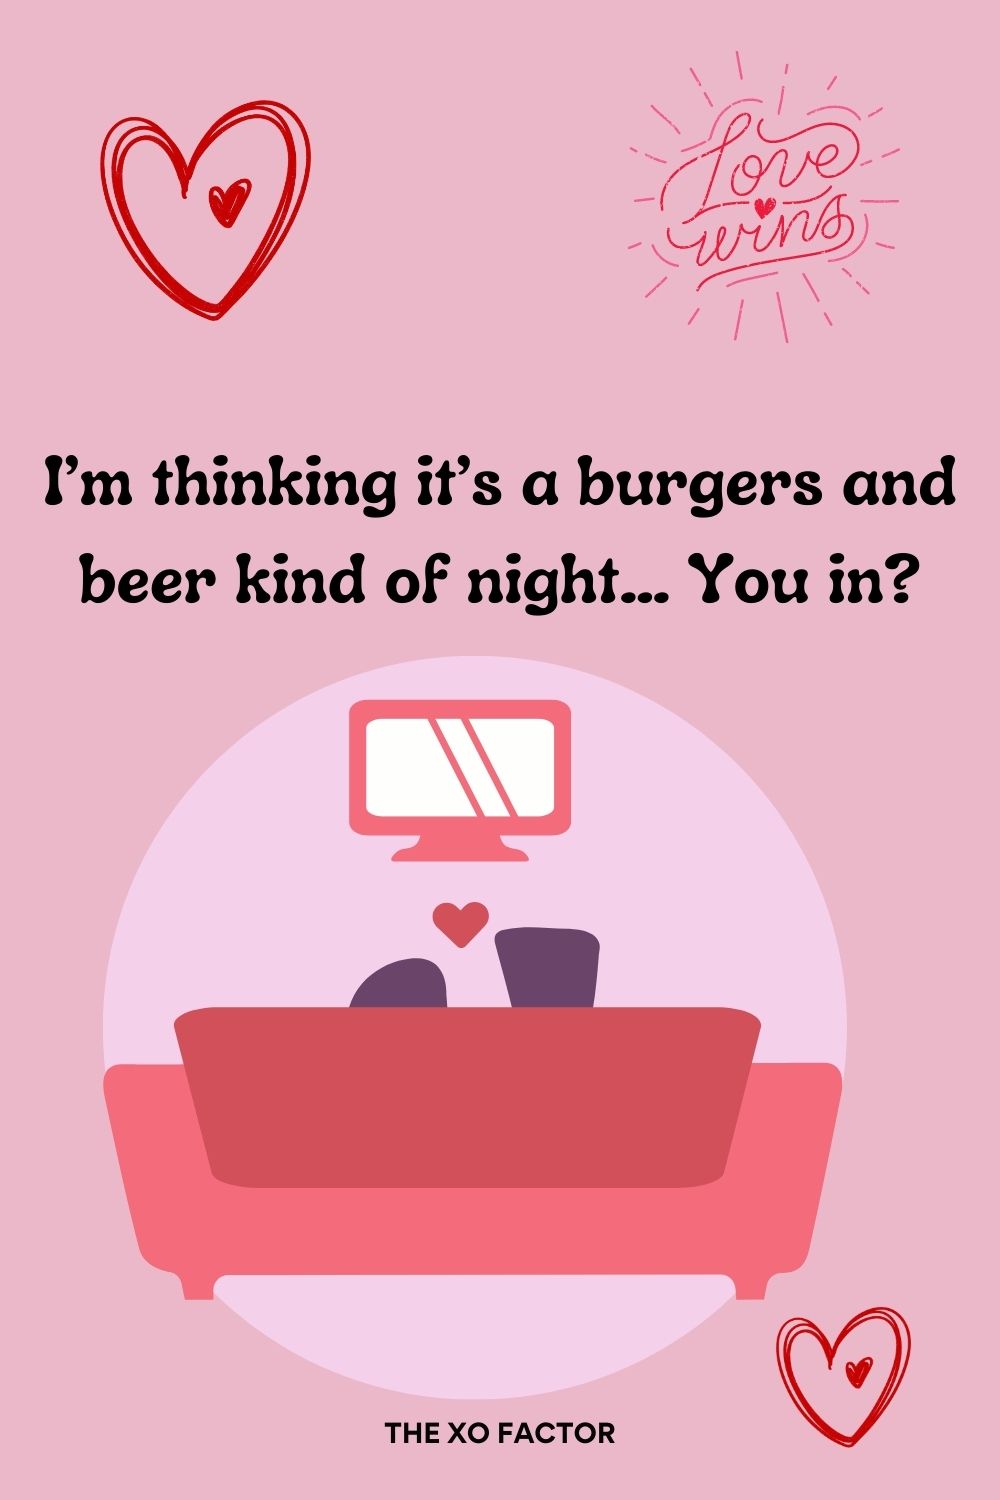  I’m thinking it’s a burgers and beer kind of night… You in?